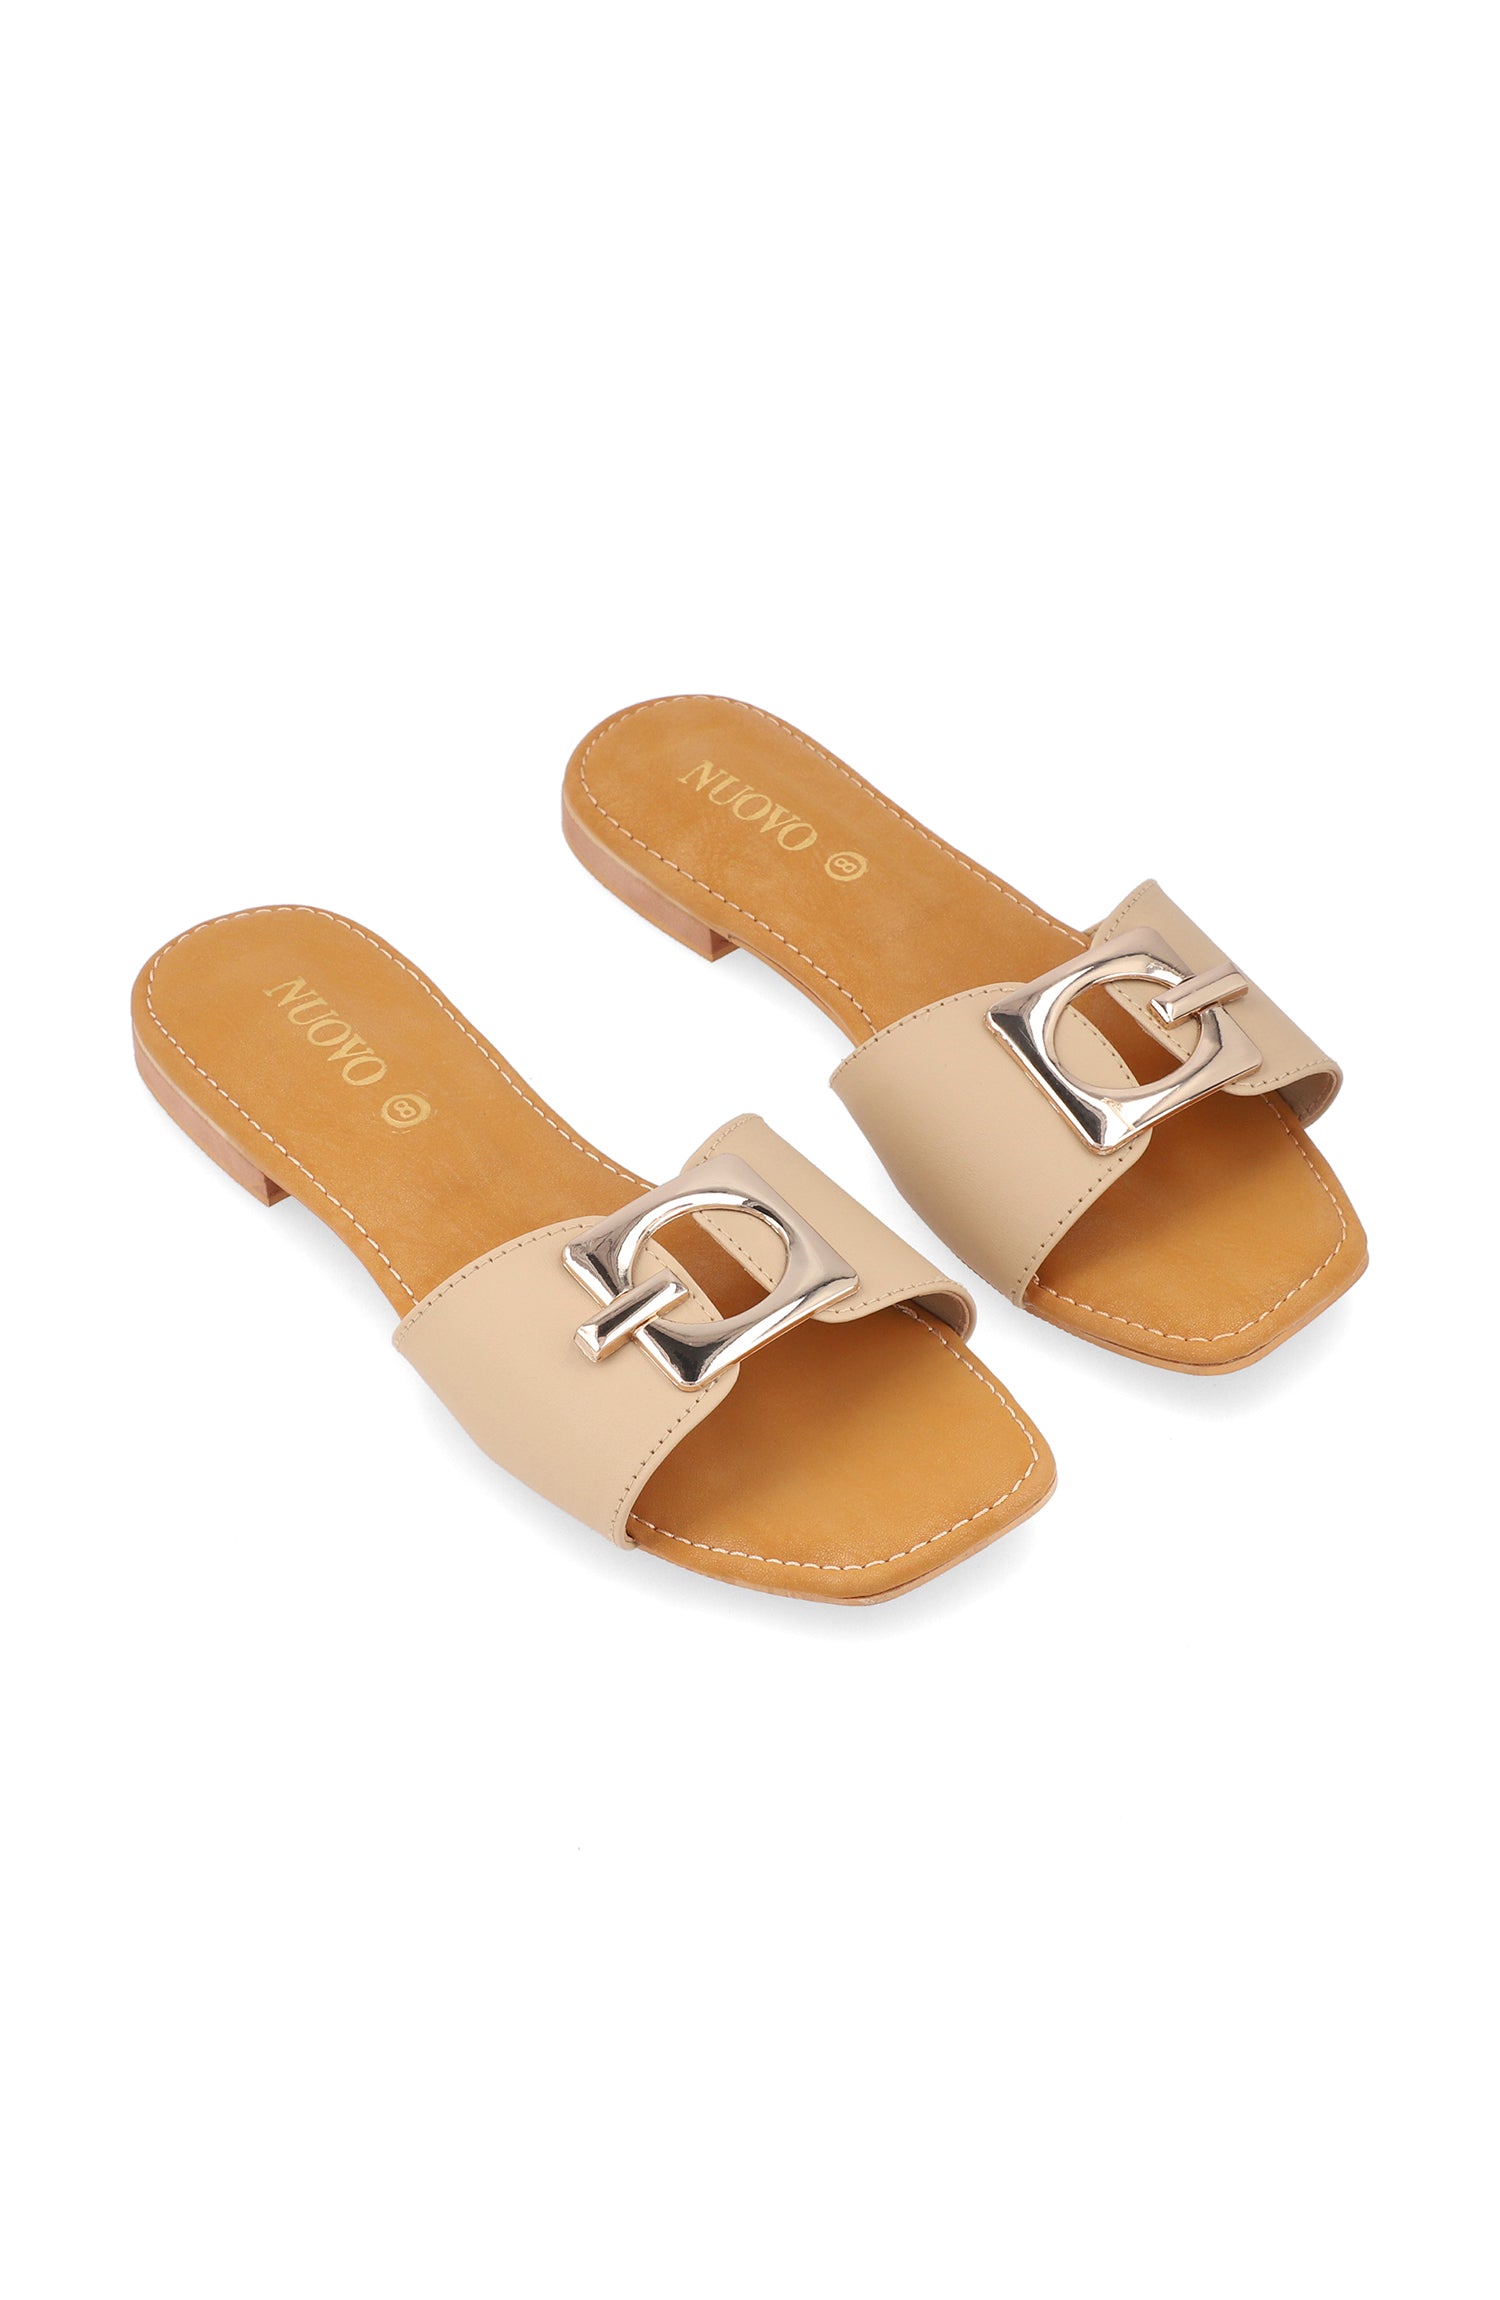 Women Slippers -  FAWN (ORFS-73 FAWN)